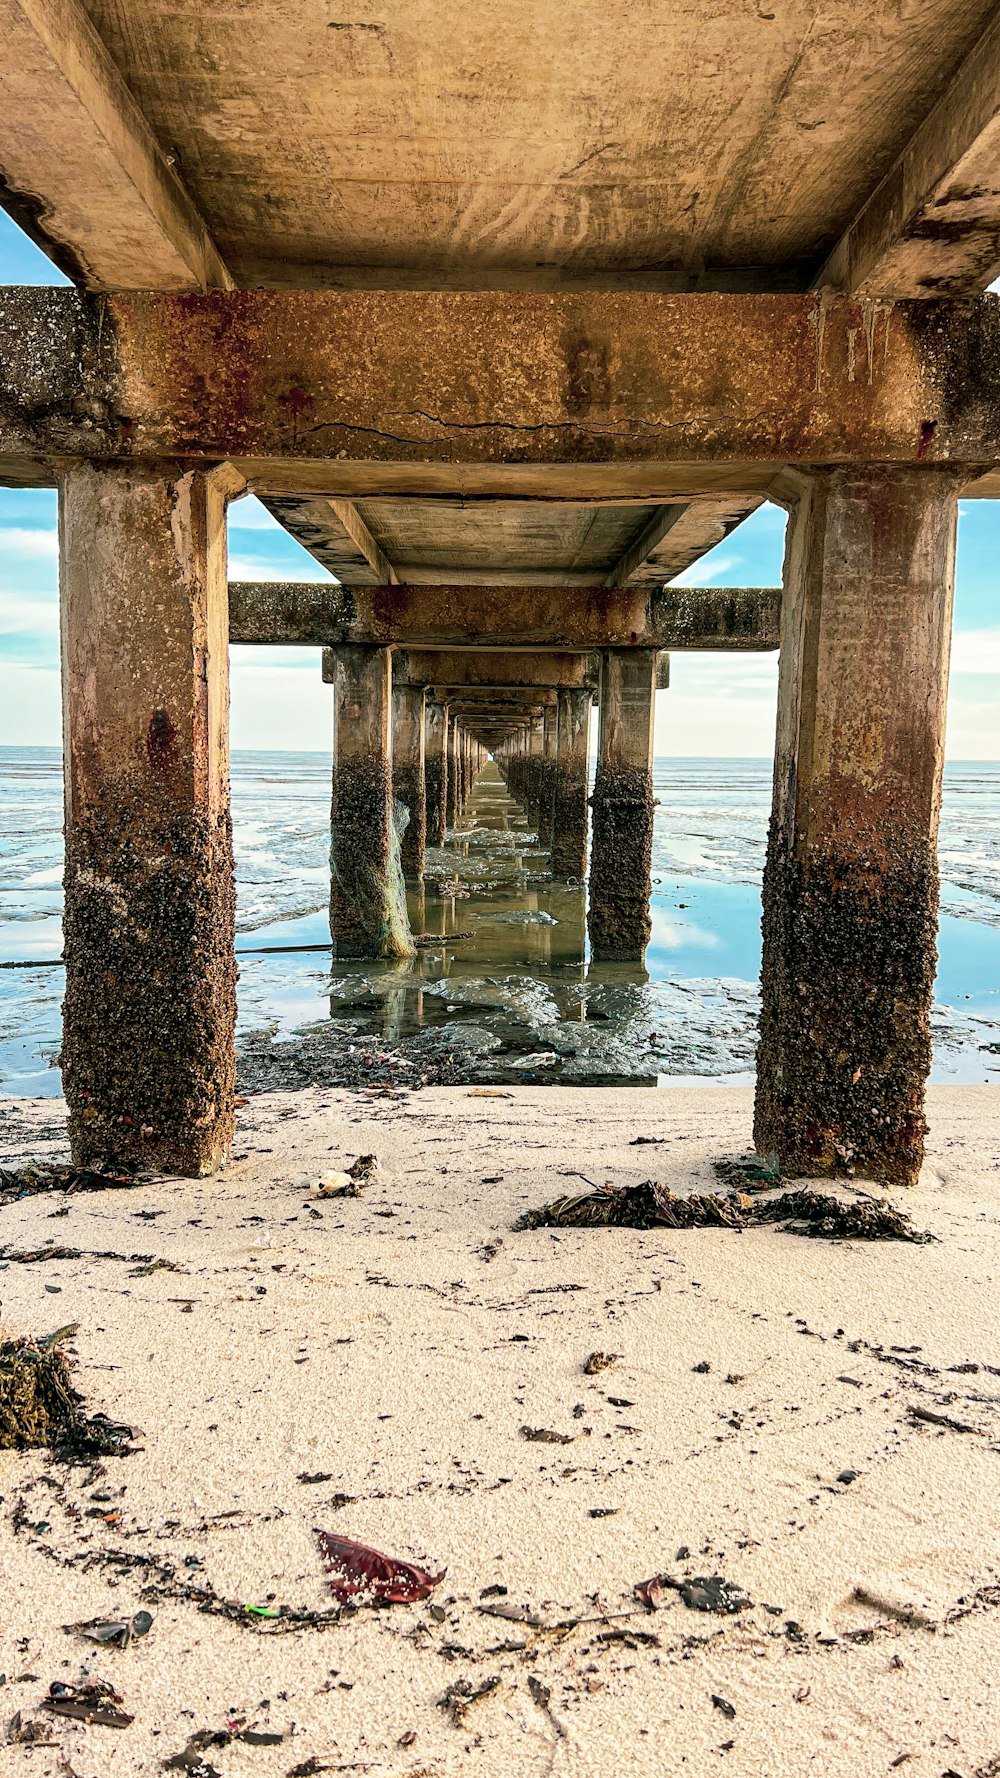 a view of the underside of a pier from the beach